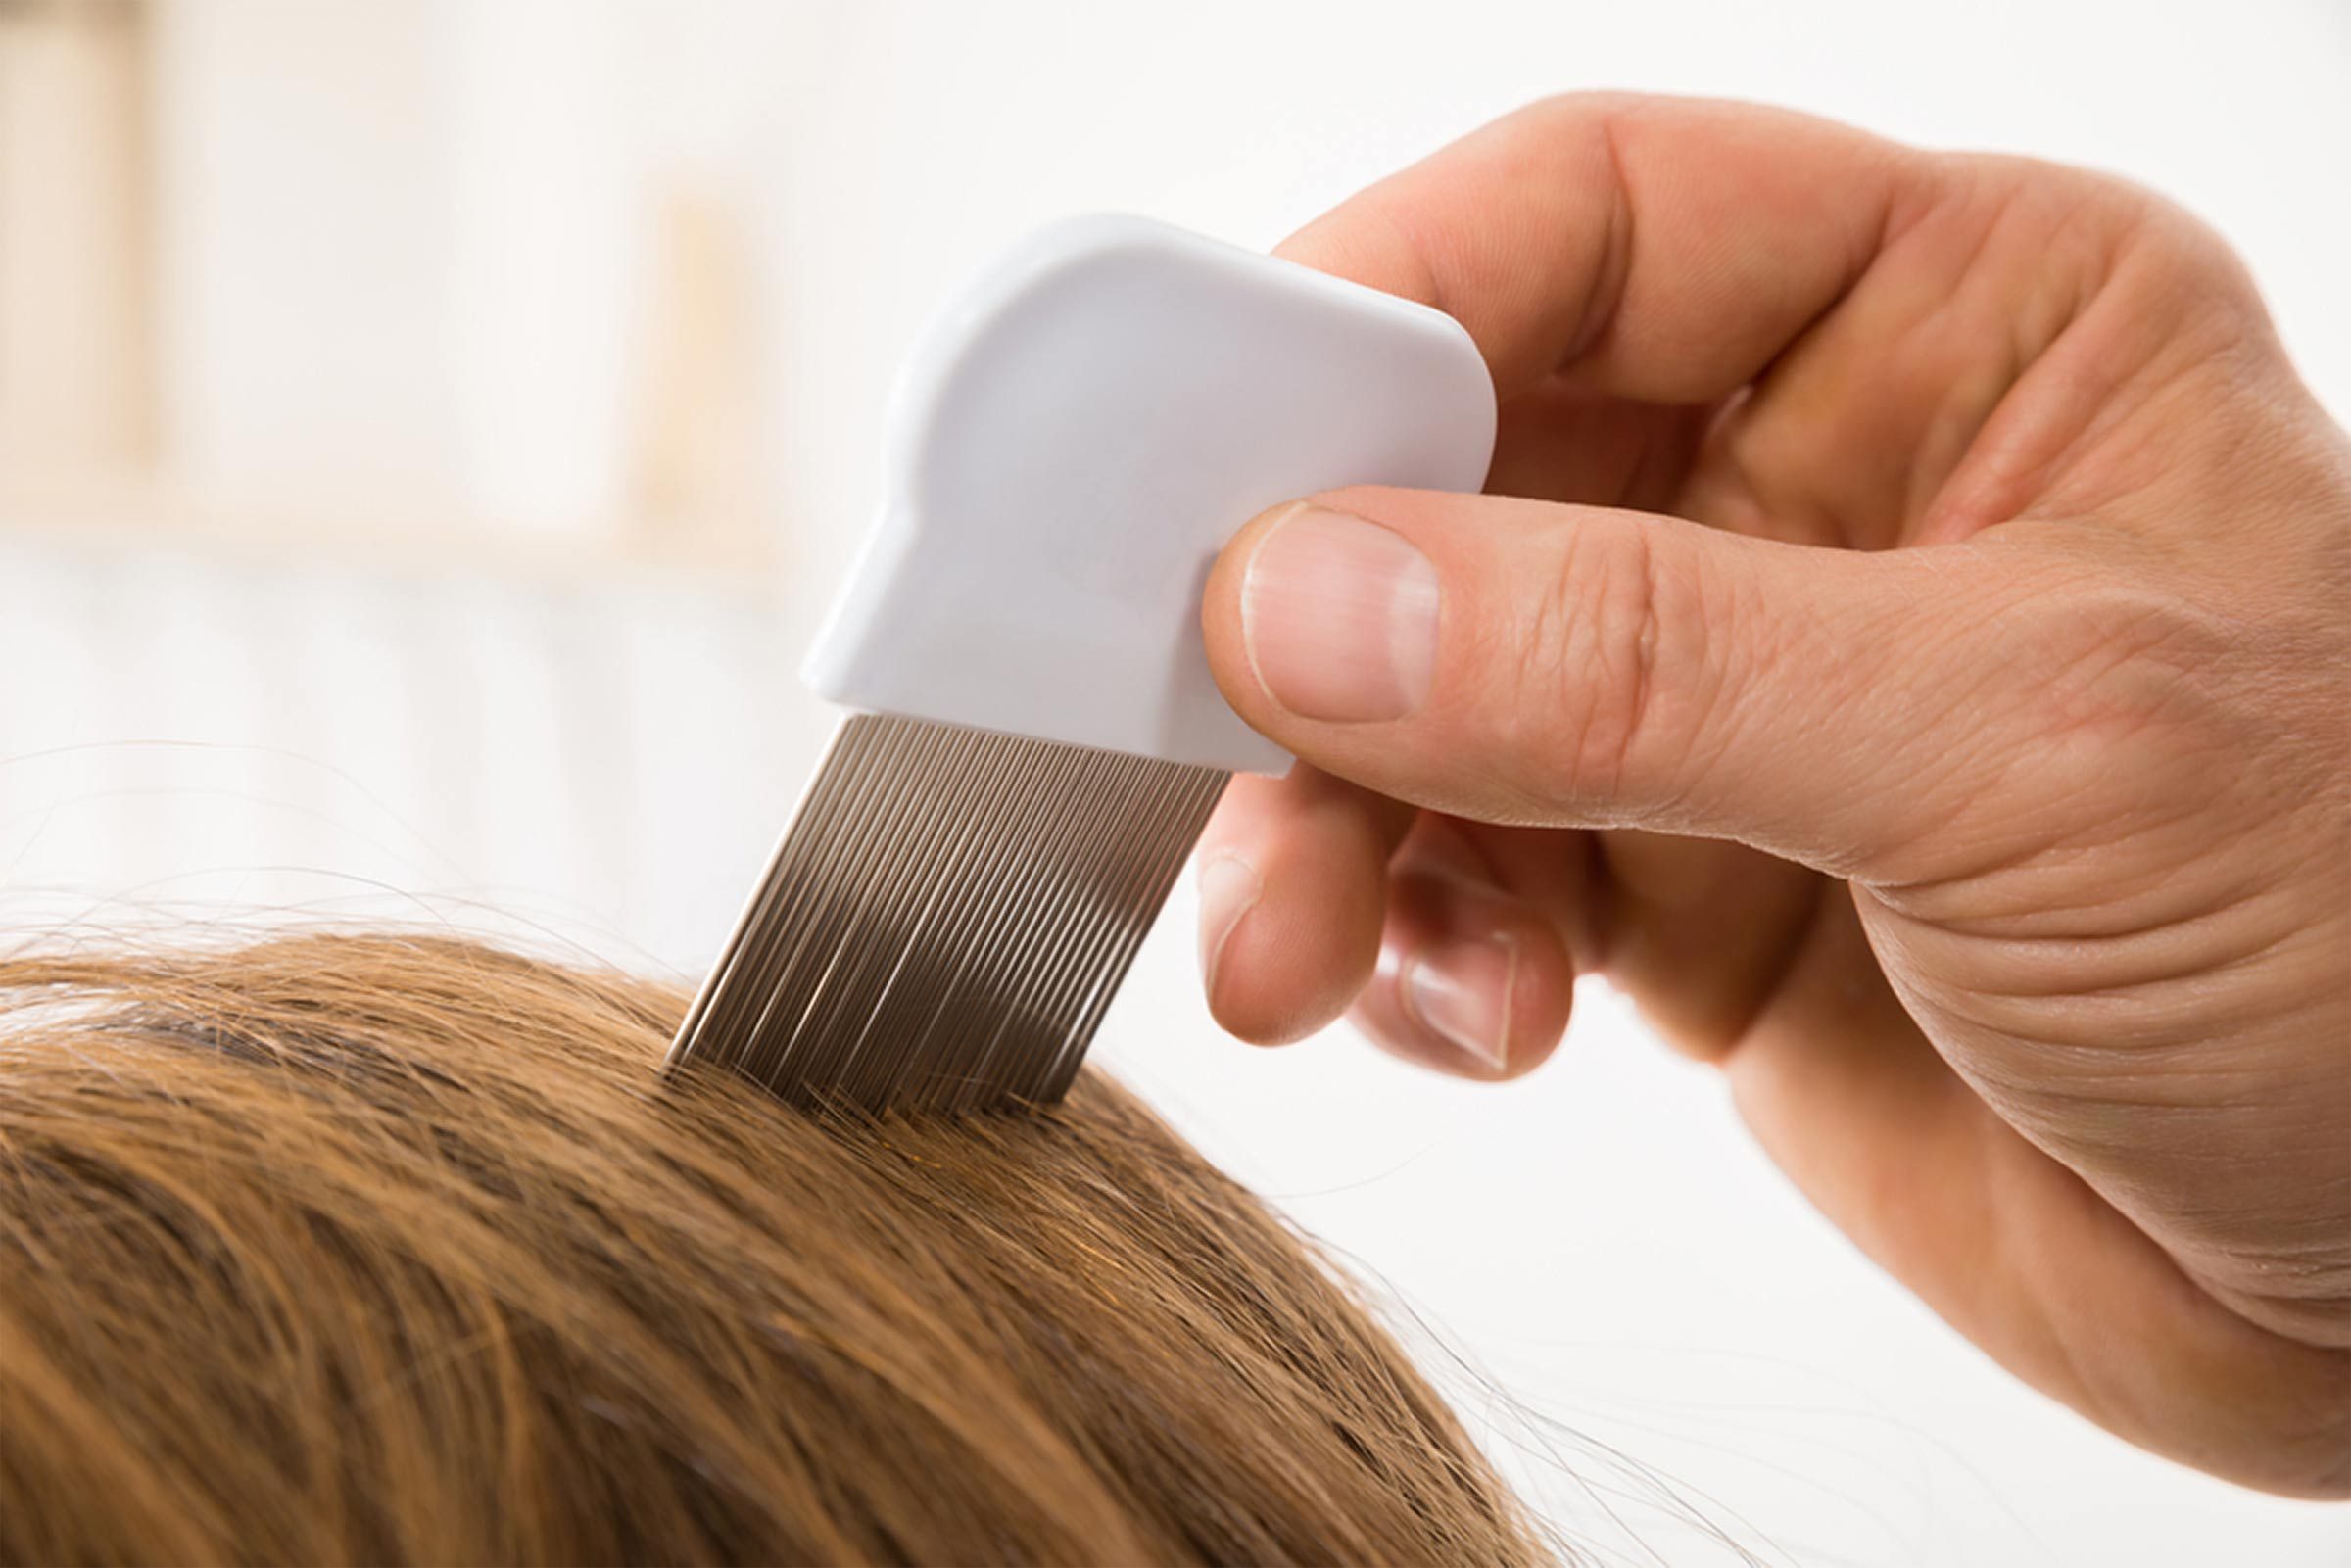 Reasons for Your Itchy Scalp (Besides Head Lice) | The Healthy